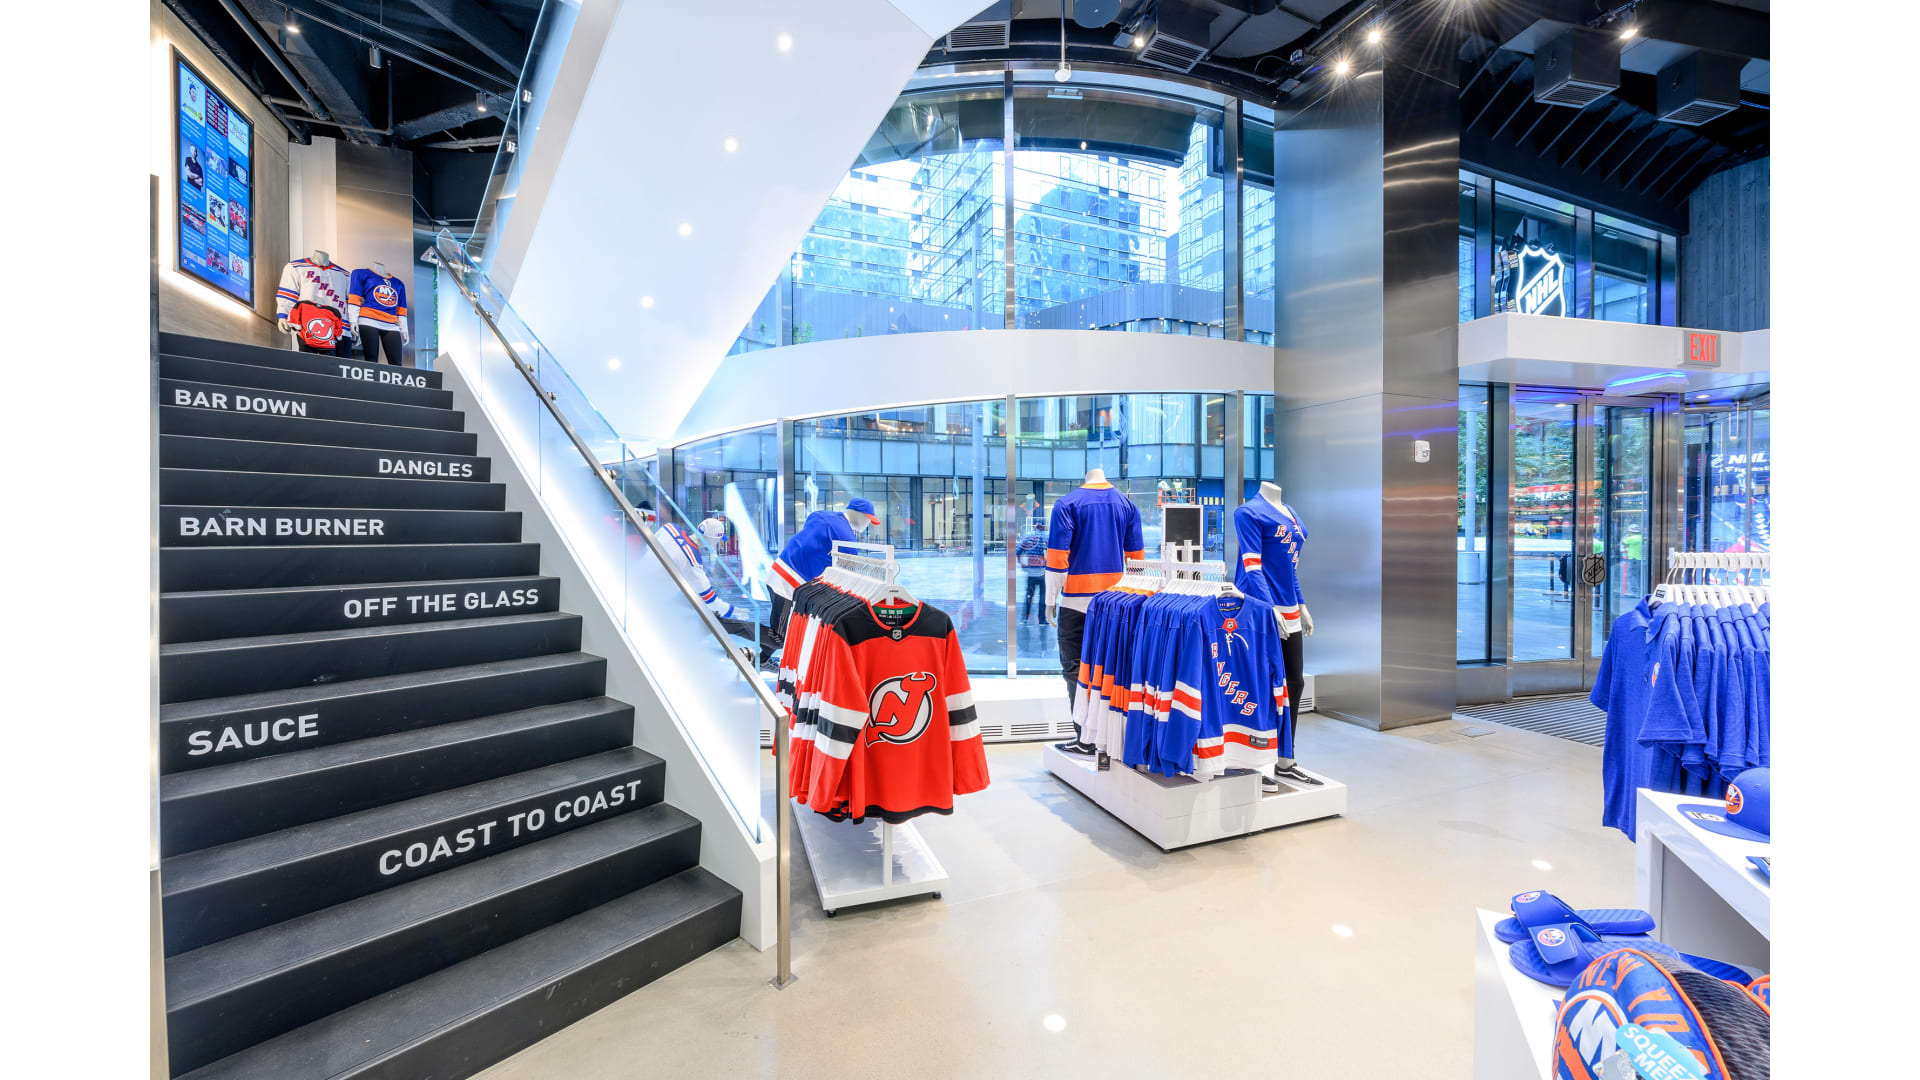 NHL Shop (@officialnhlshop) • Instagram photos and videos